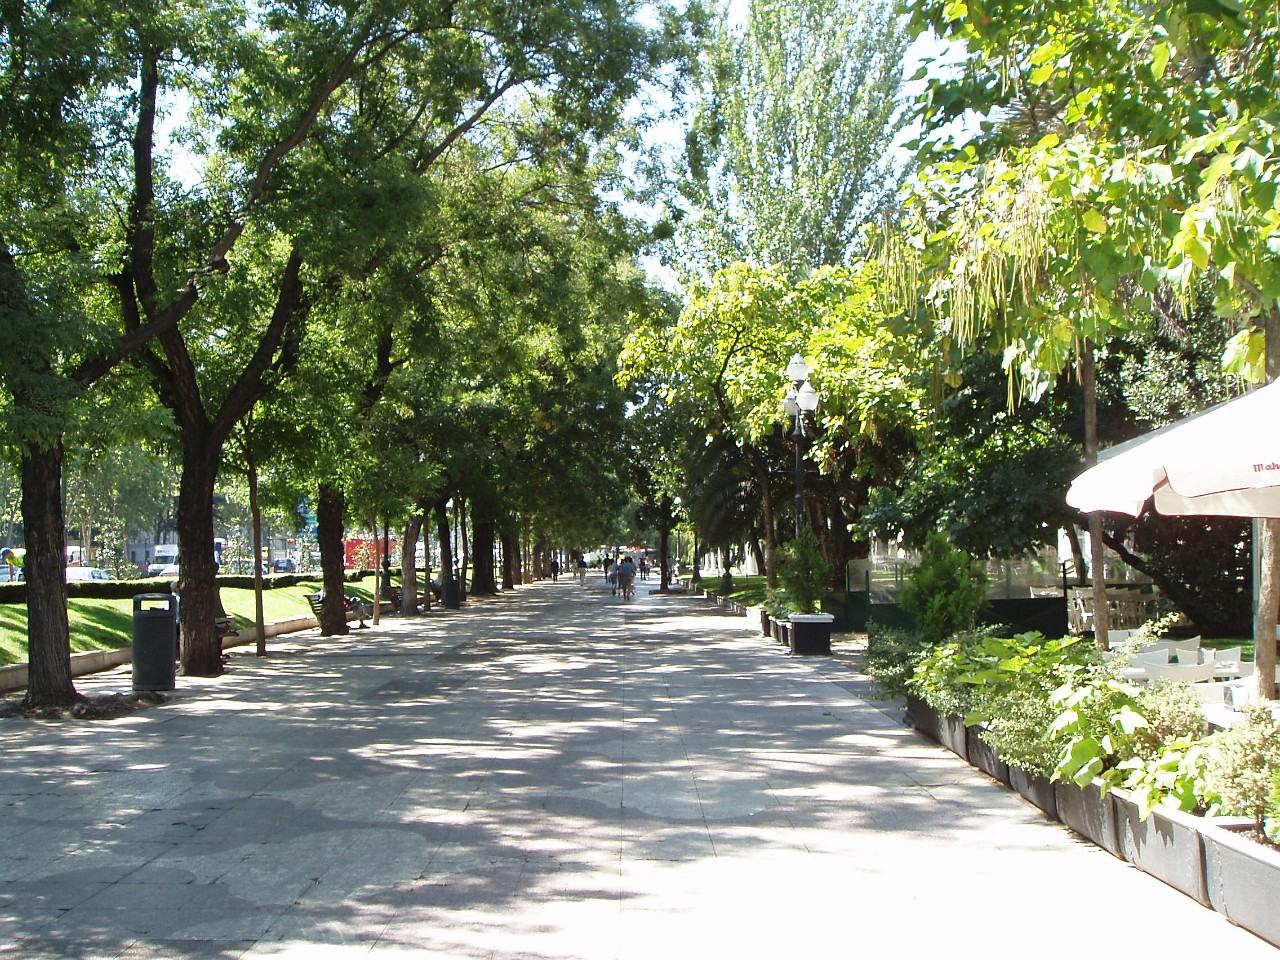 Beautiful tree-lined Paseo Recoletos